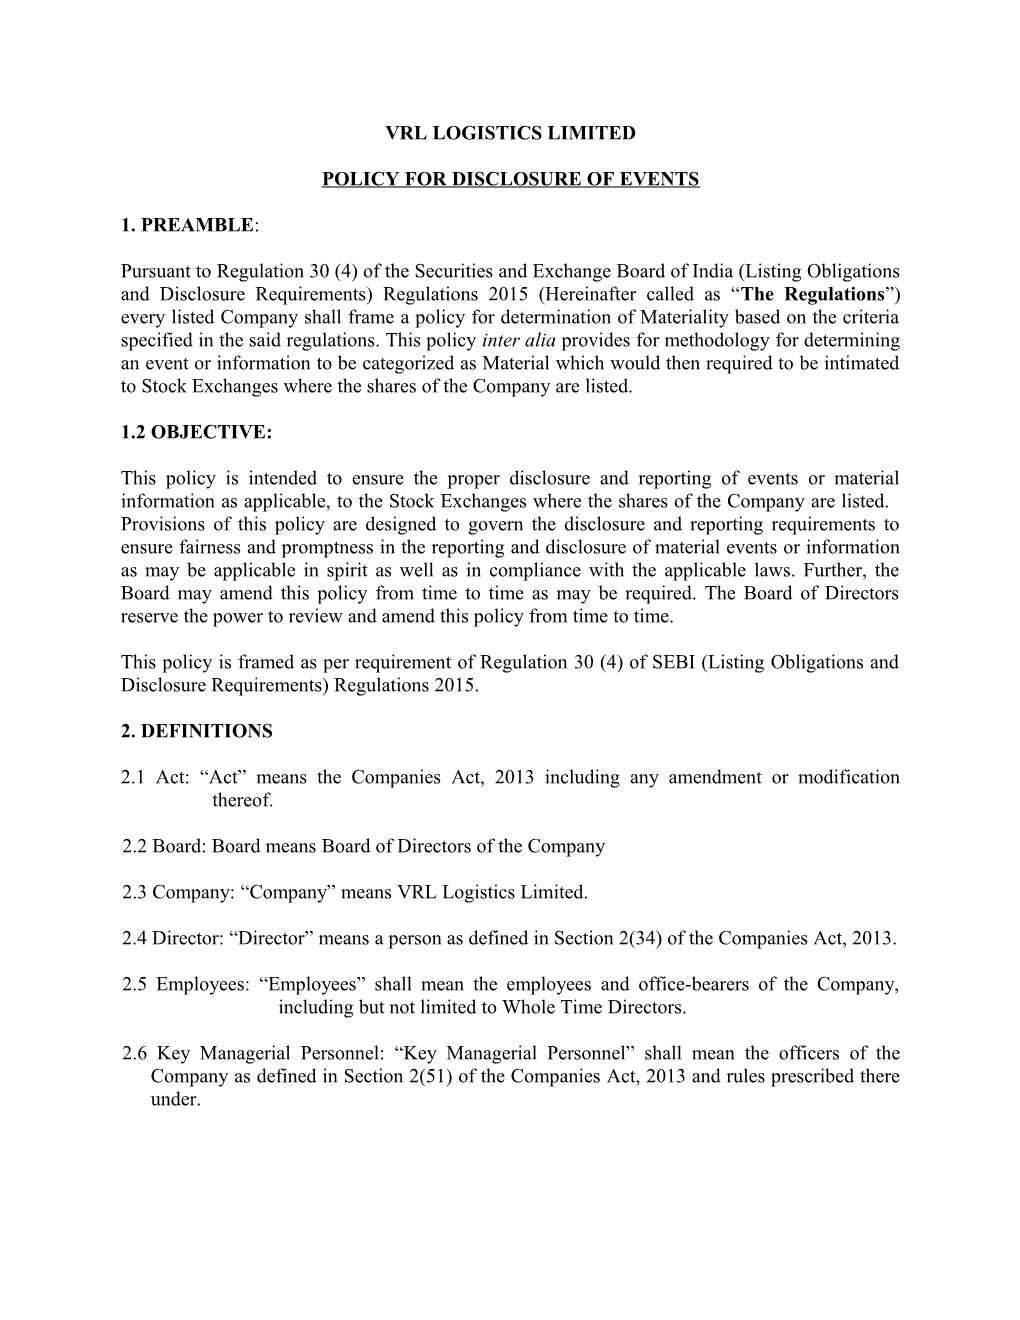 Policy for Disclosure of Events